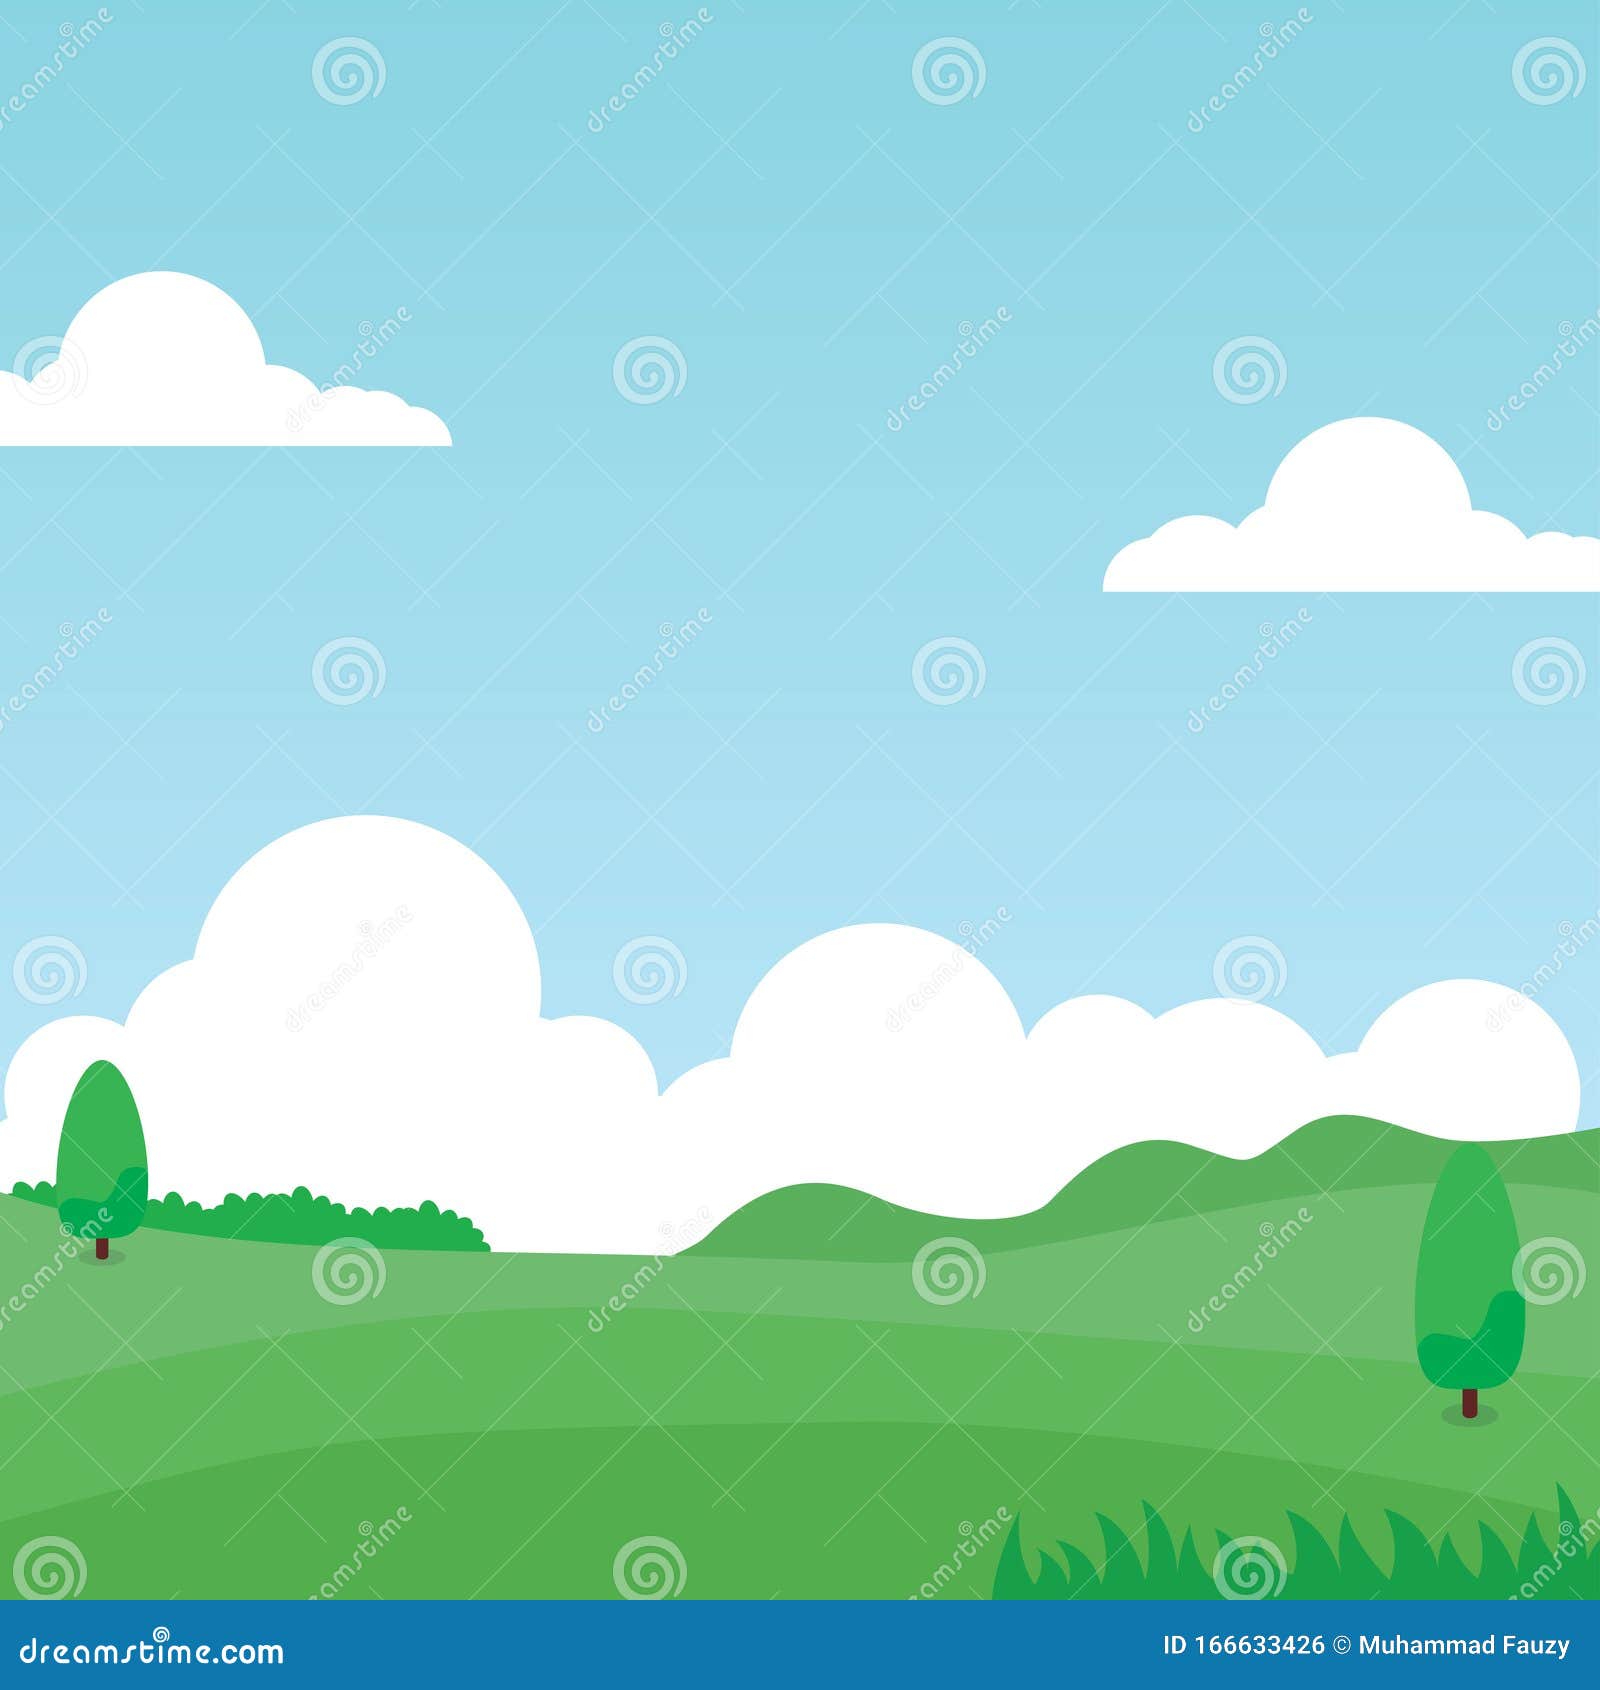 Green Meadow Cartoon Illustration with Clouds and Blue Sky Stock Vector ...